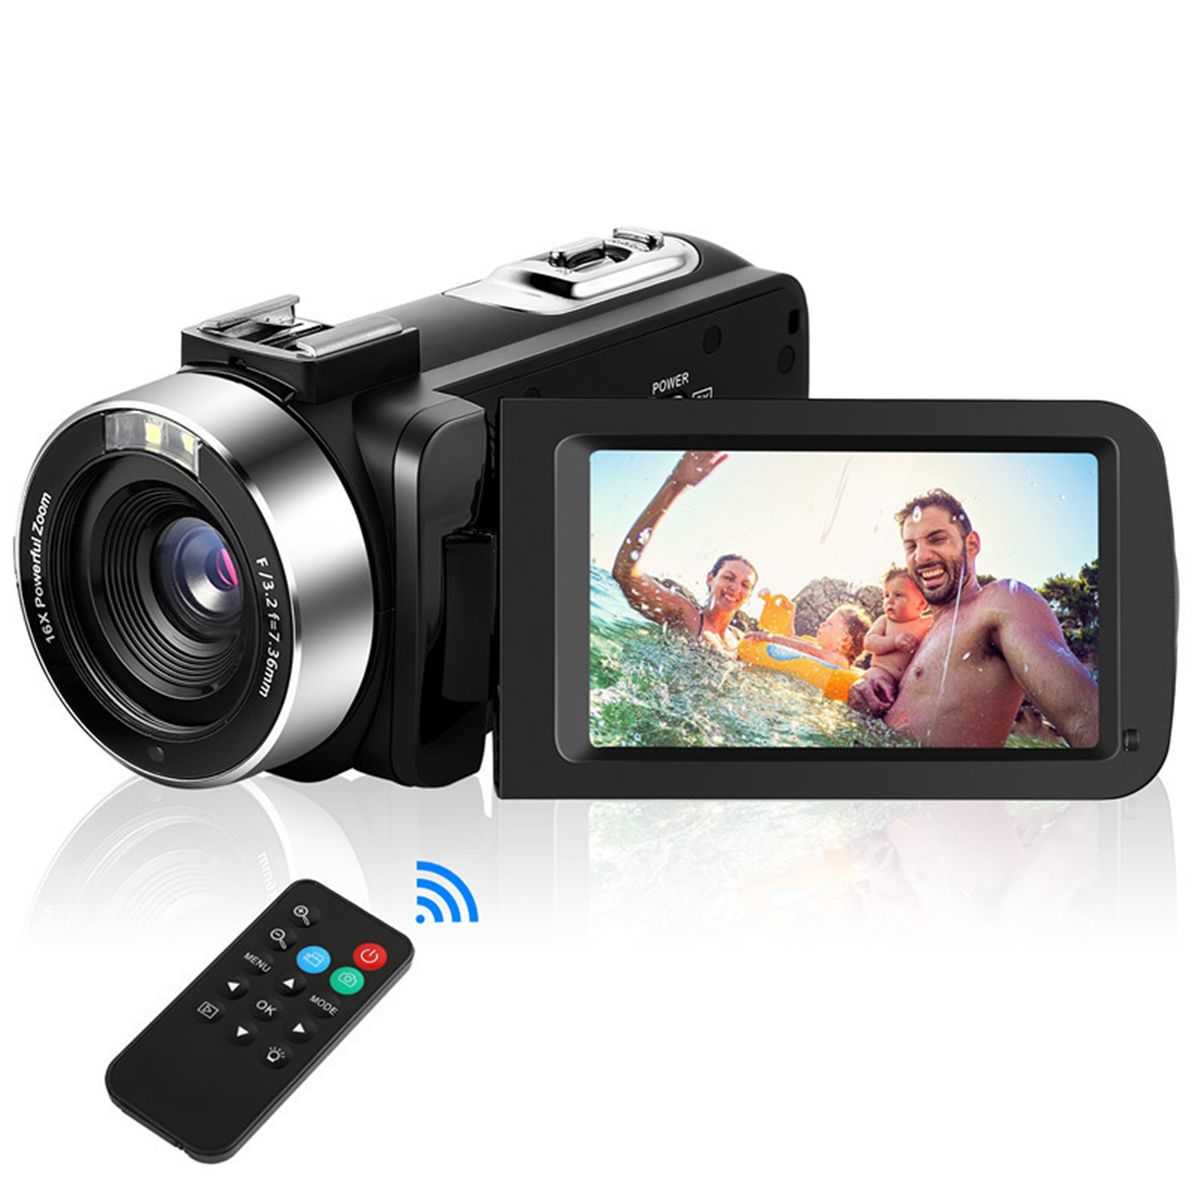 1080P-Full-HD-30MP-Pixel-18X-Touch-Screen-Digital-Video-Camera-Camcorder-for-YouTube-Vlogging-Vlog-D-1706115